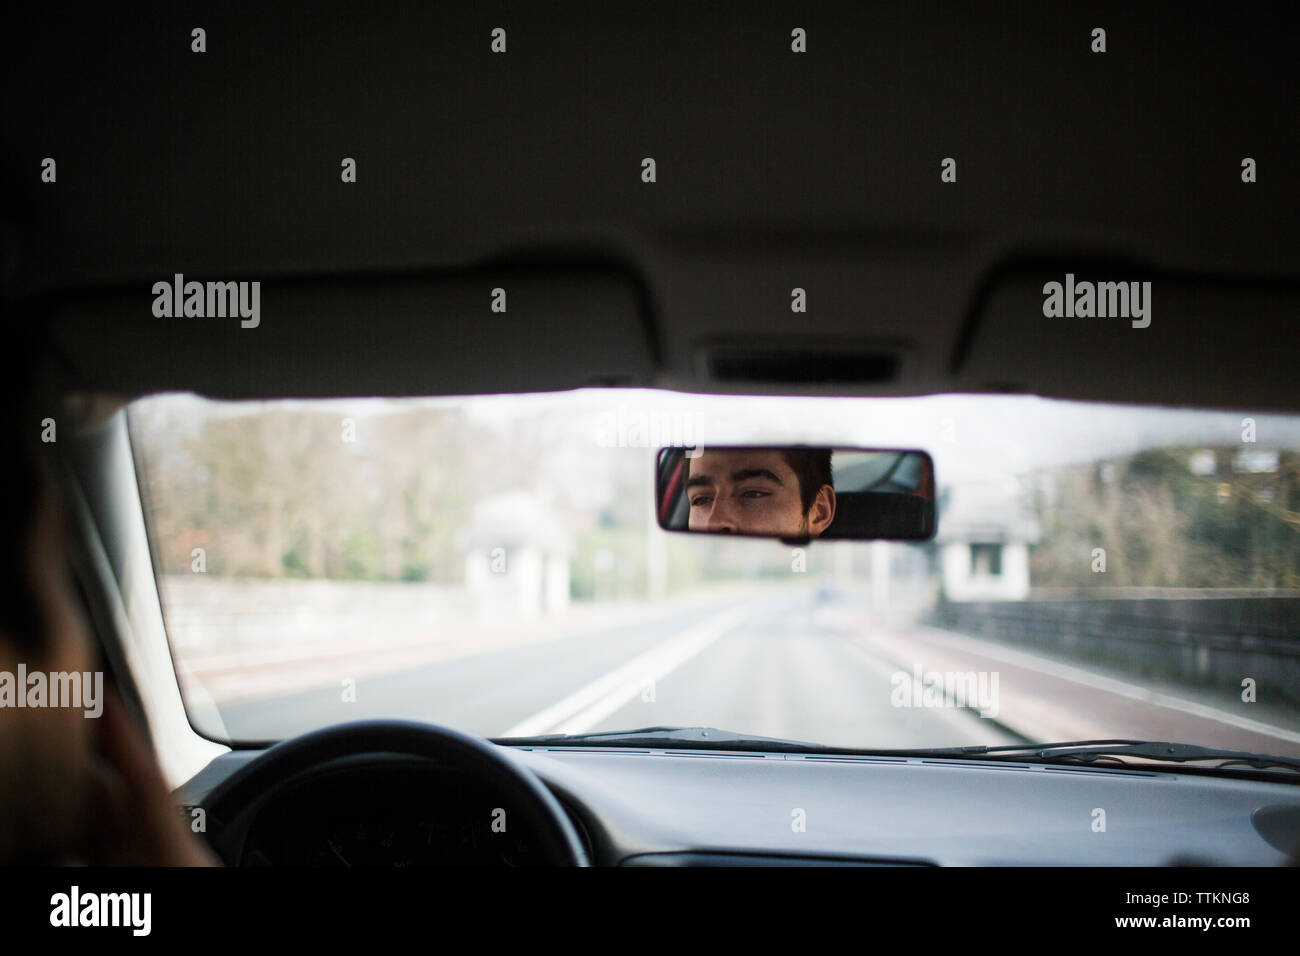 Reflection of man in car rear-view mirror on road Stock Photo